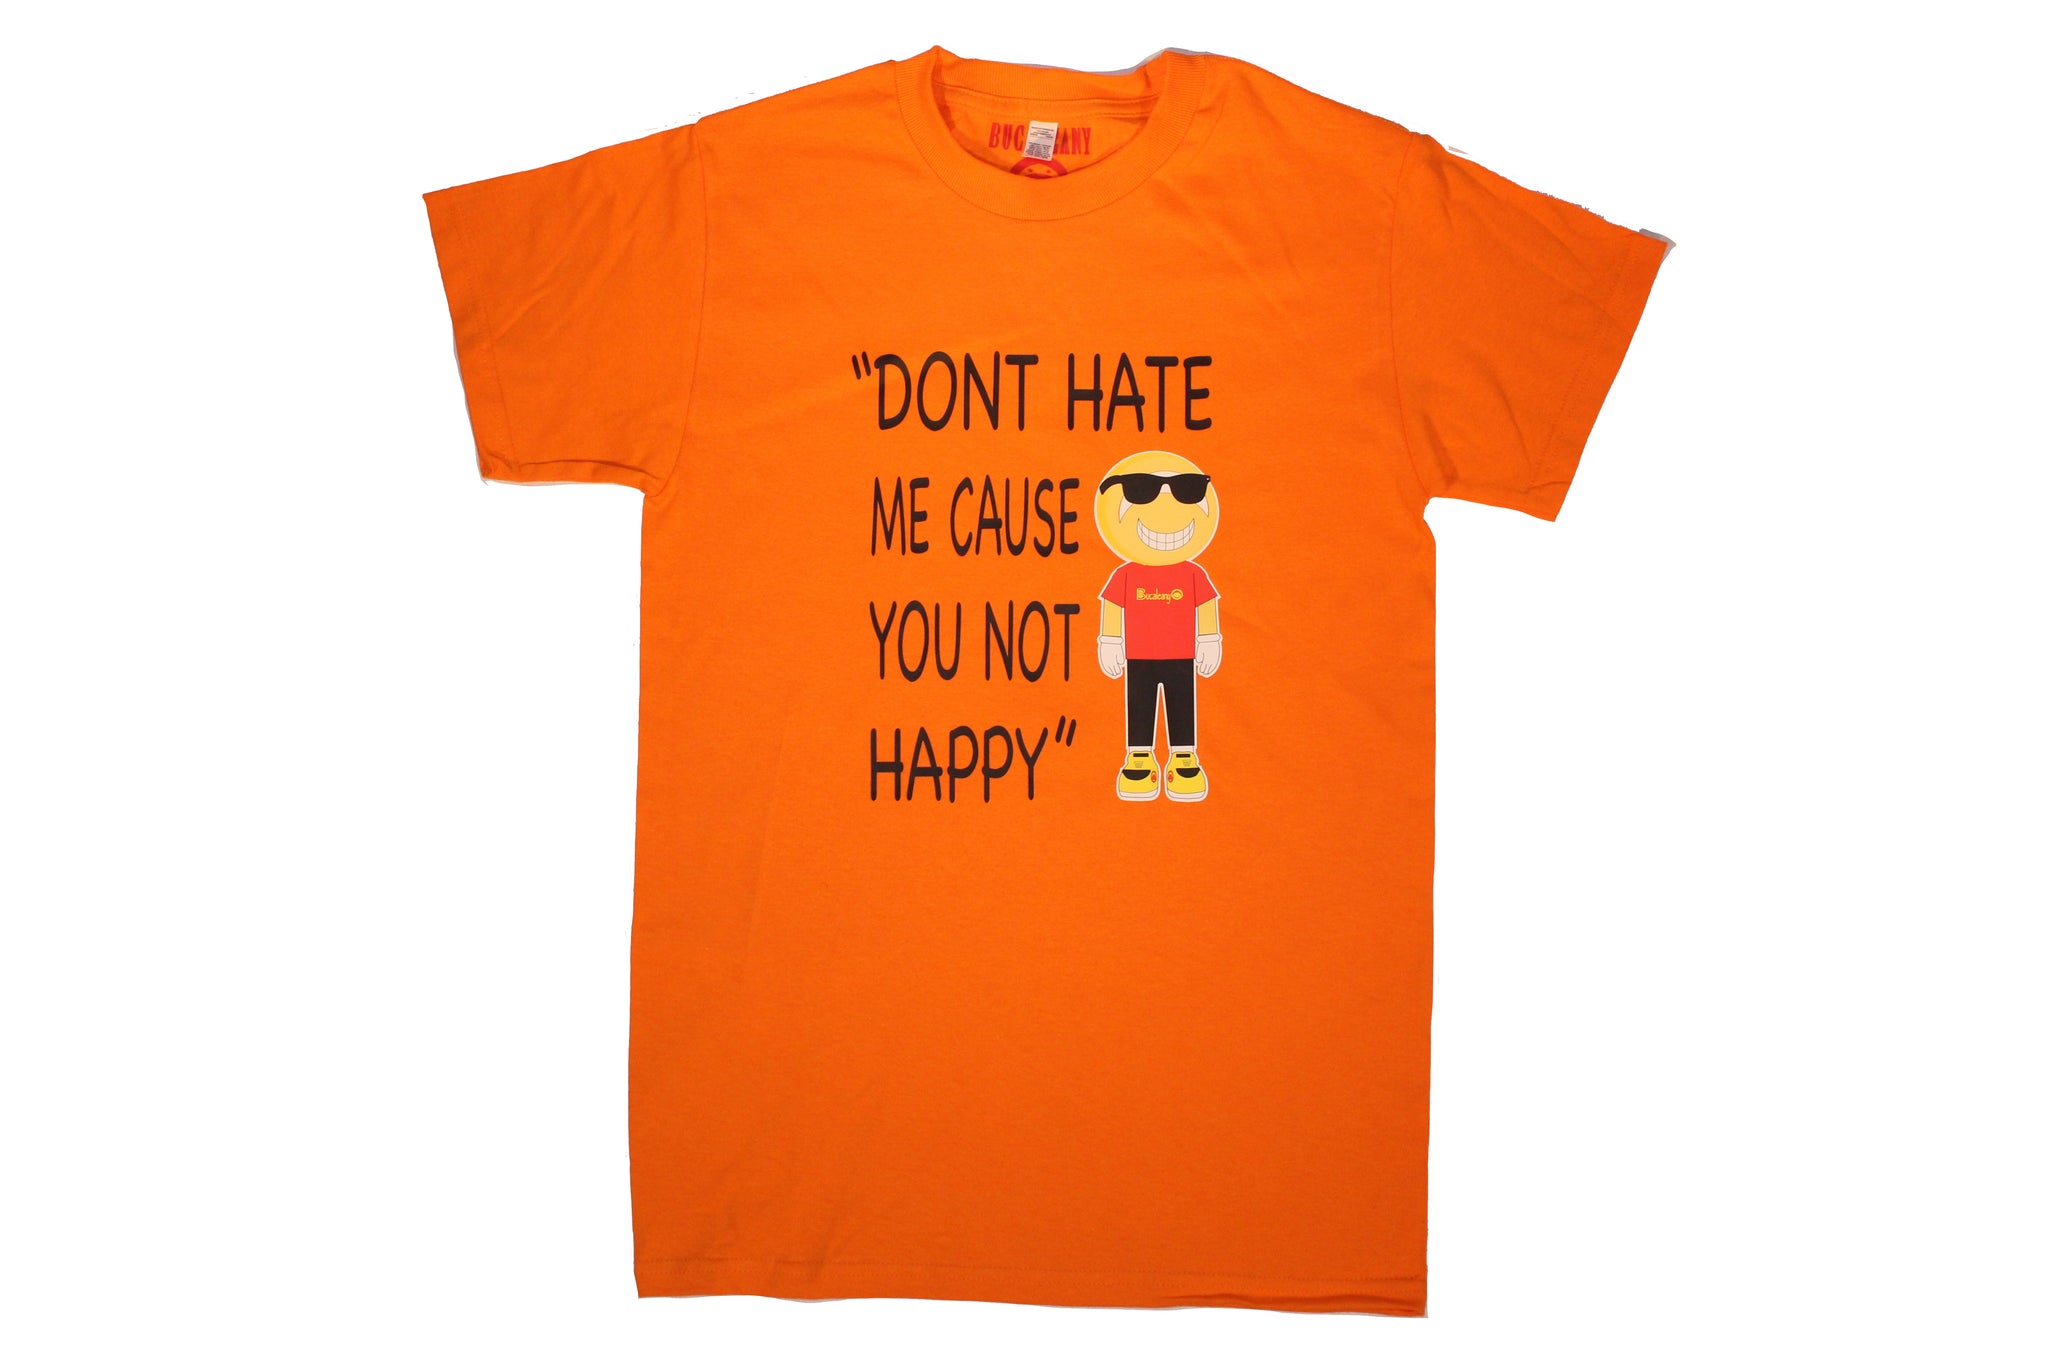 NEW Bucaleany "DON'T HATE ME CAUSE YOU NOT HAPPY" T-shirt